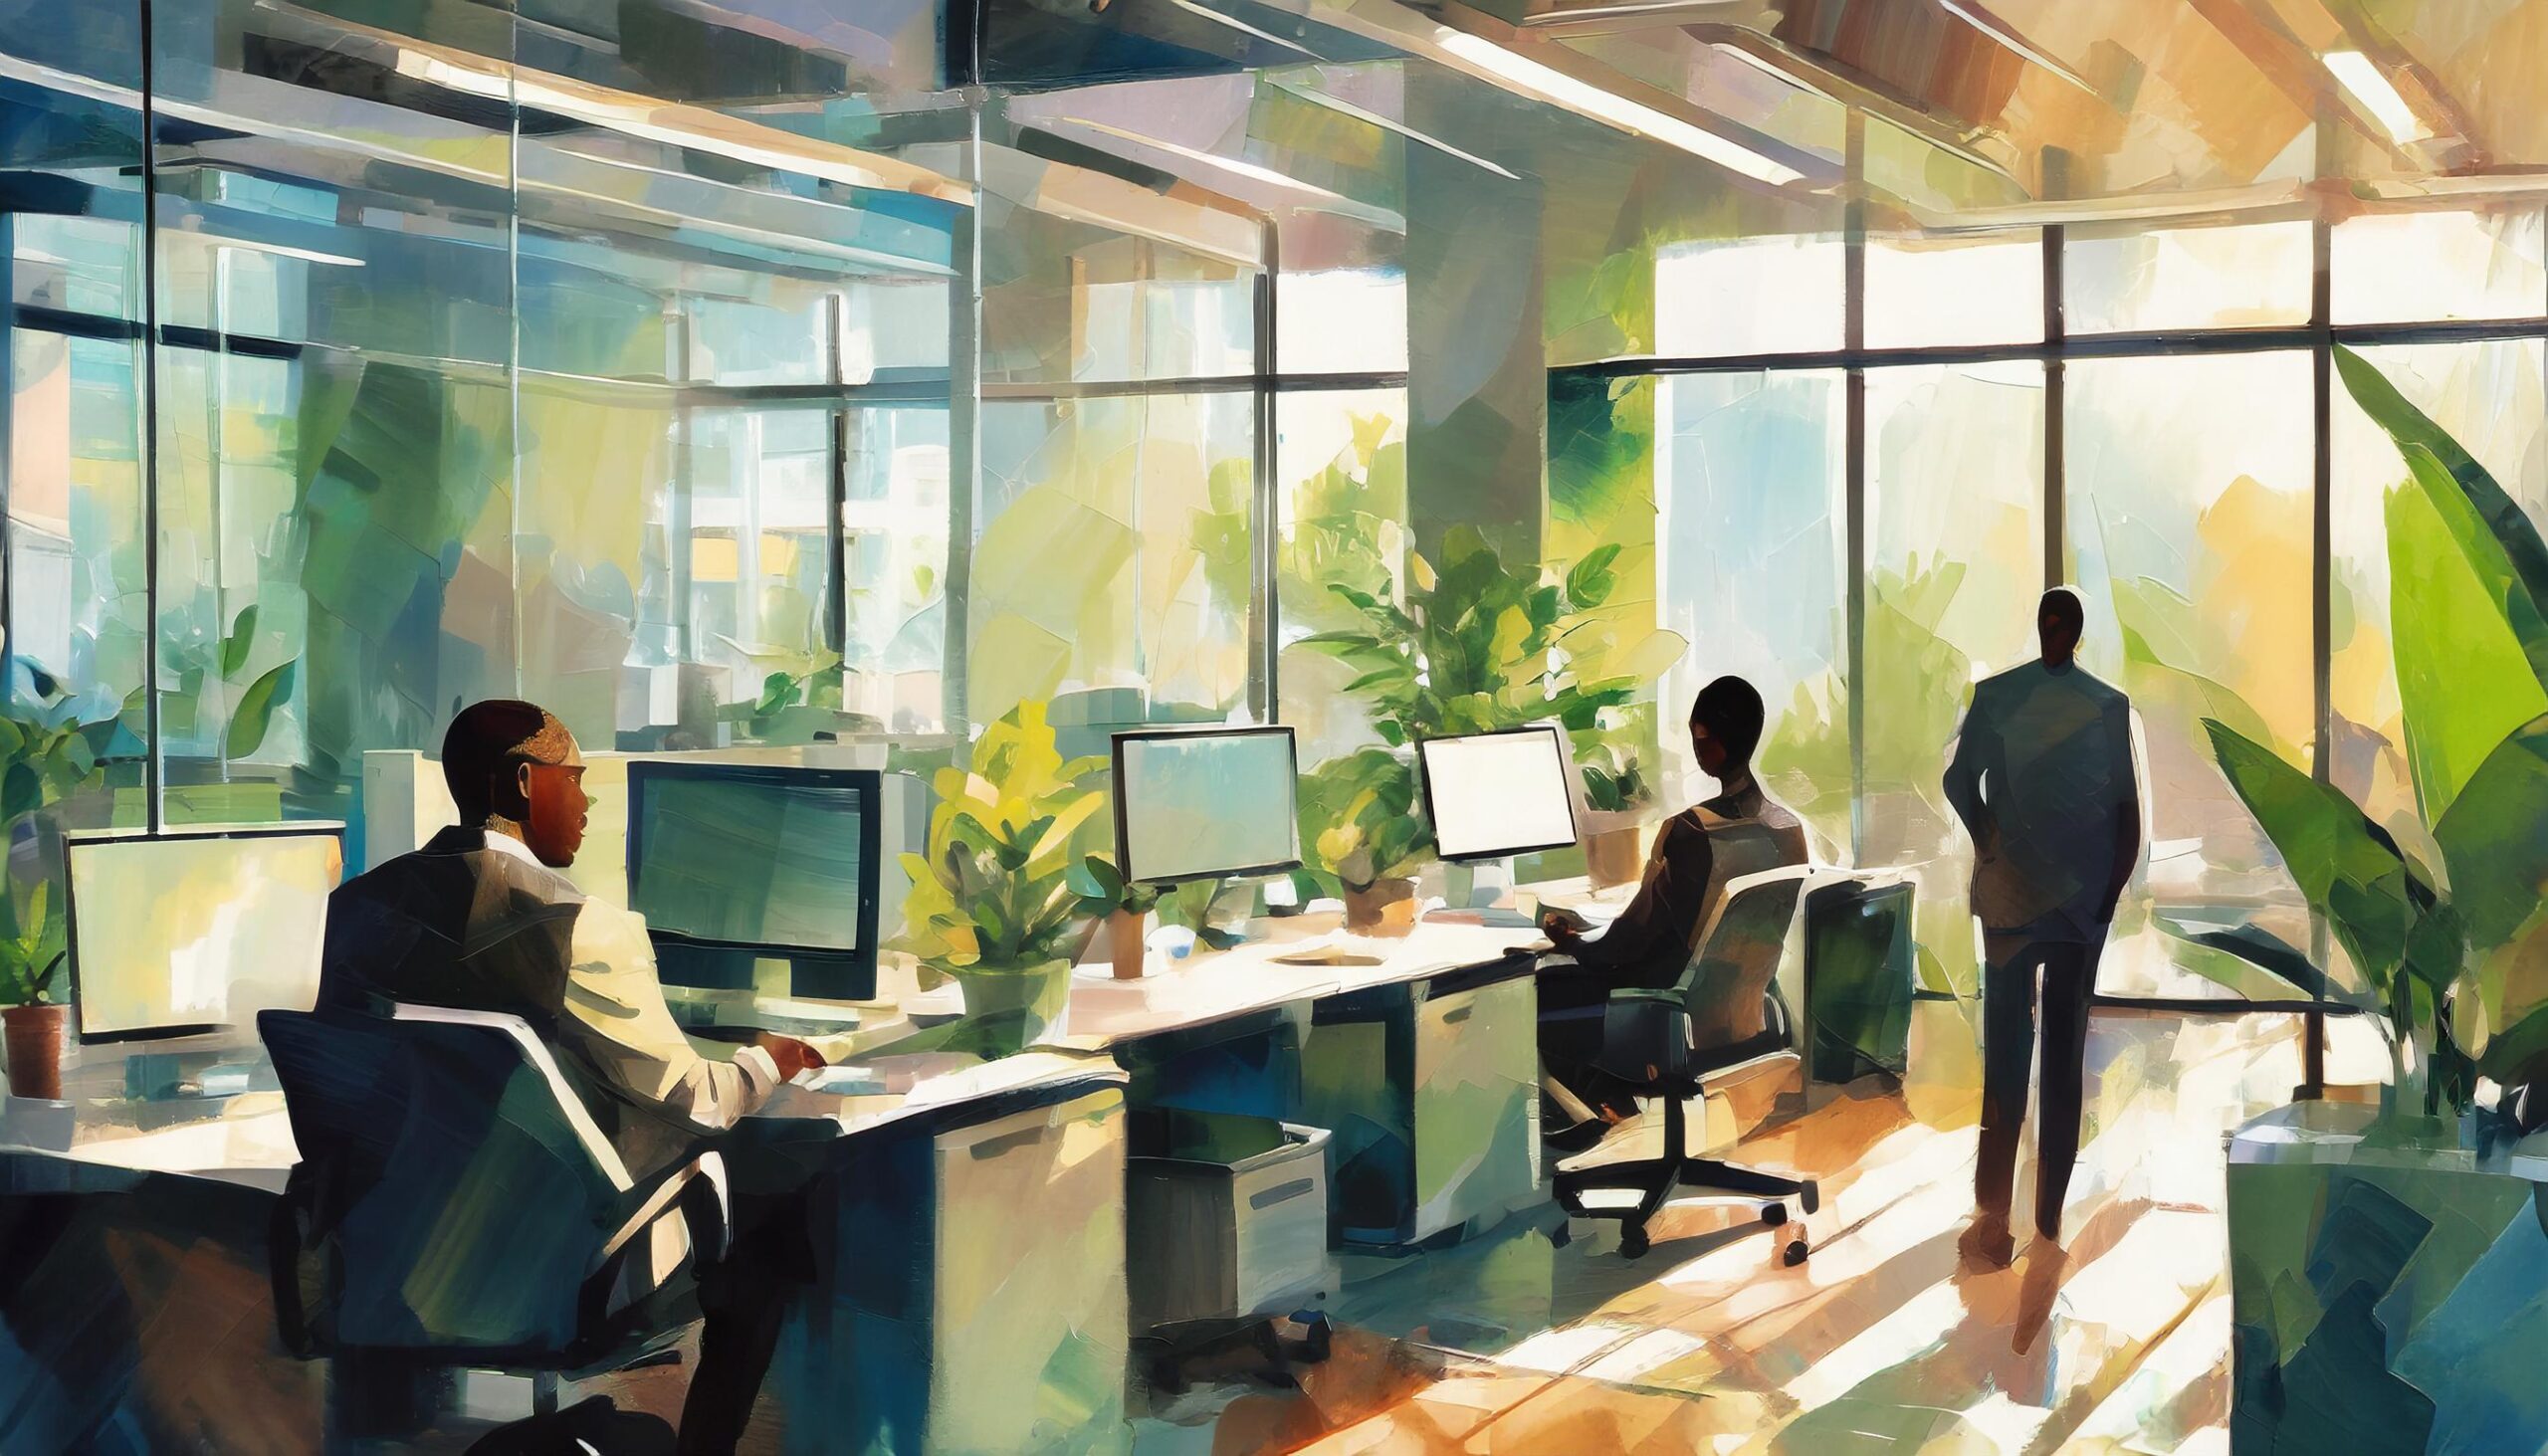 Power-Free Desks: The Eco-Friendly Future of Office Furniture